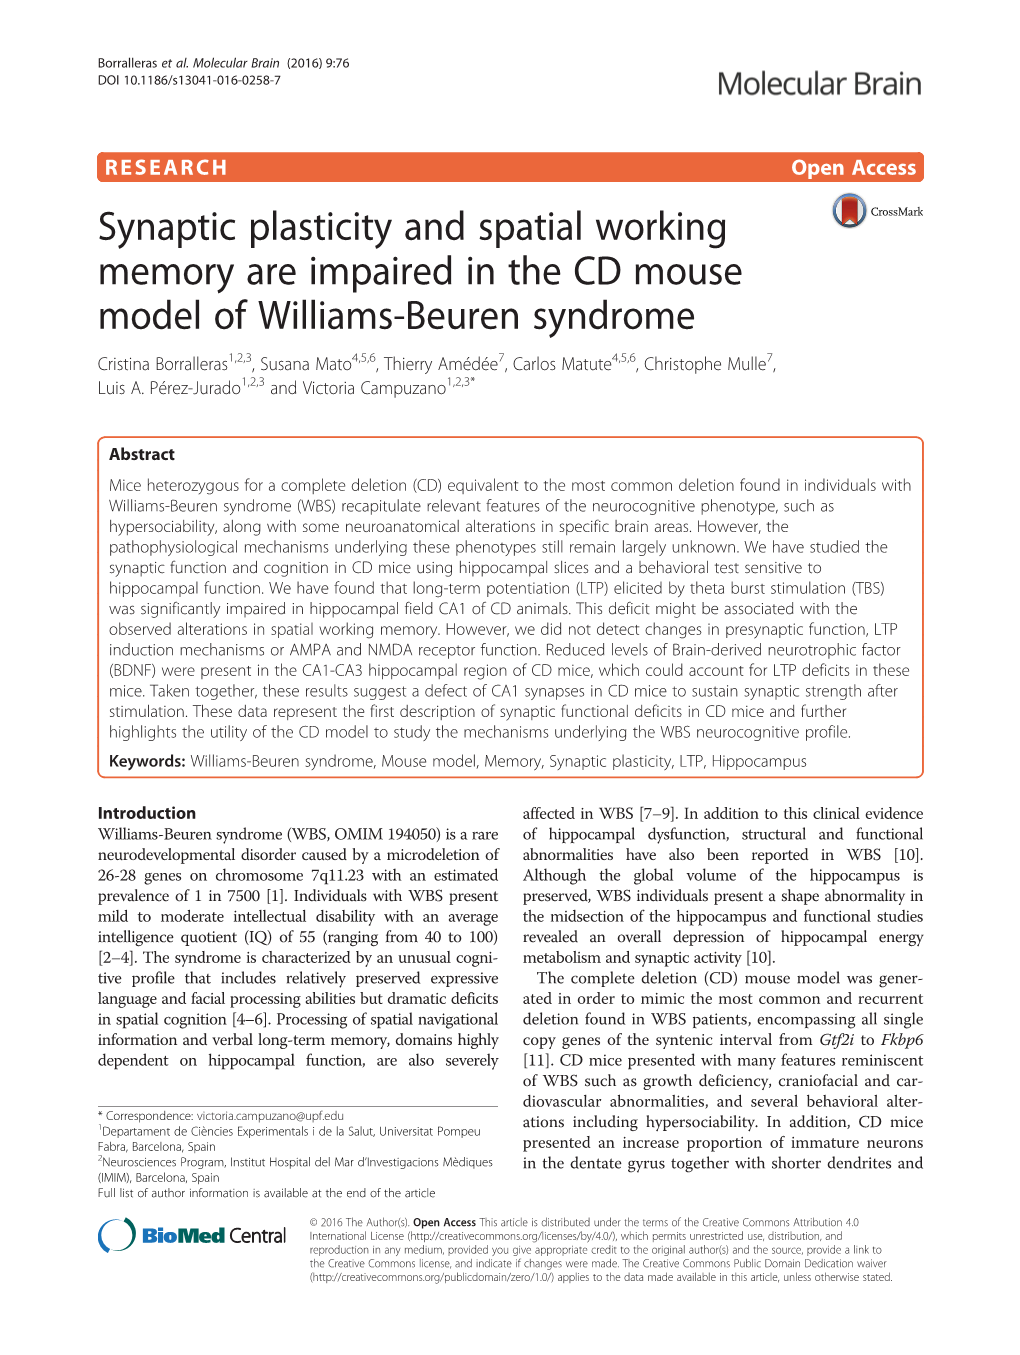 Synaptic Plasticity and Spatial Working Memory Are Impaired in the CD